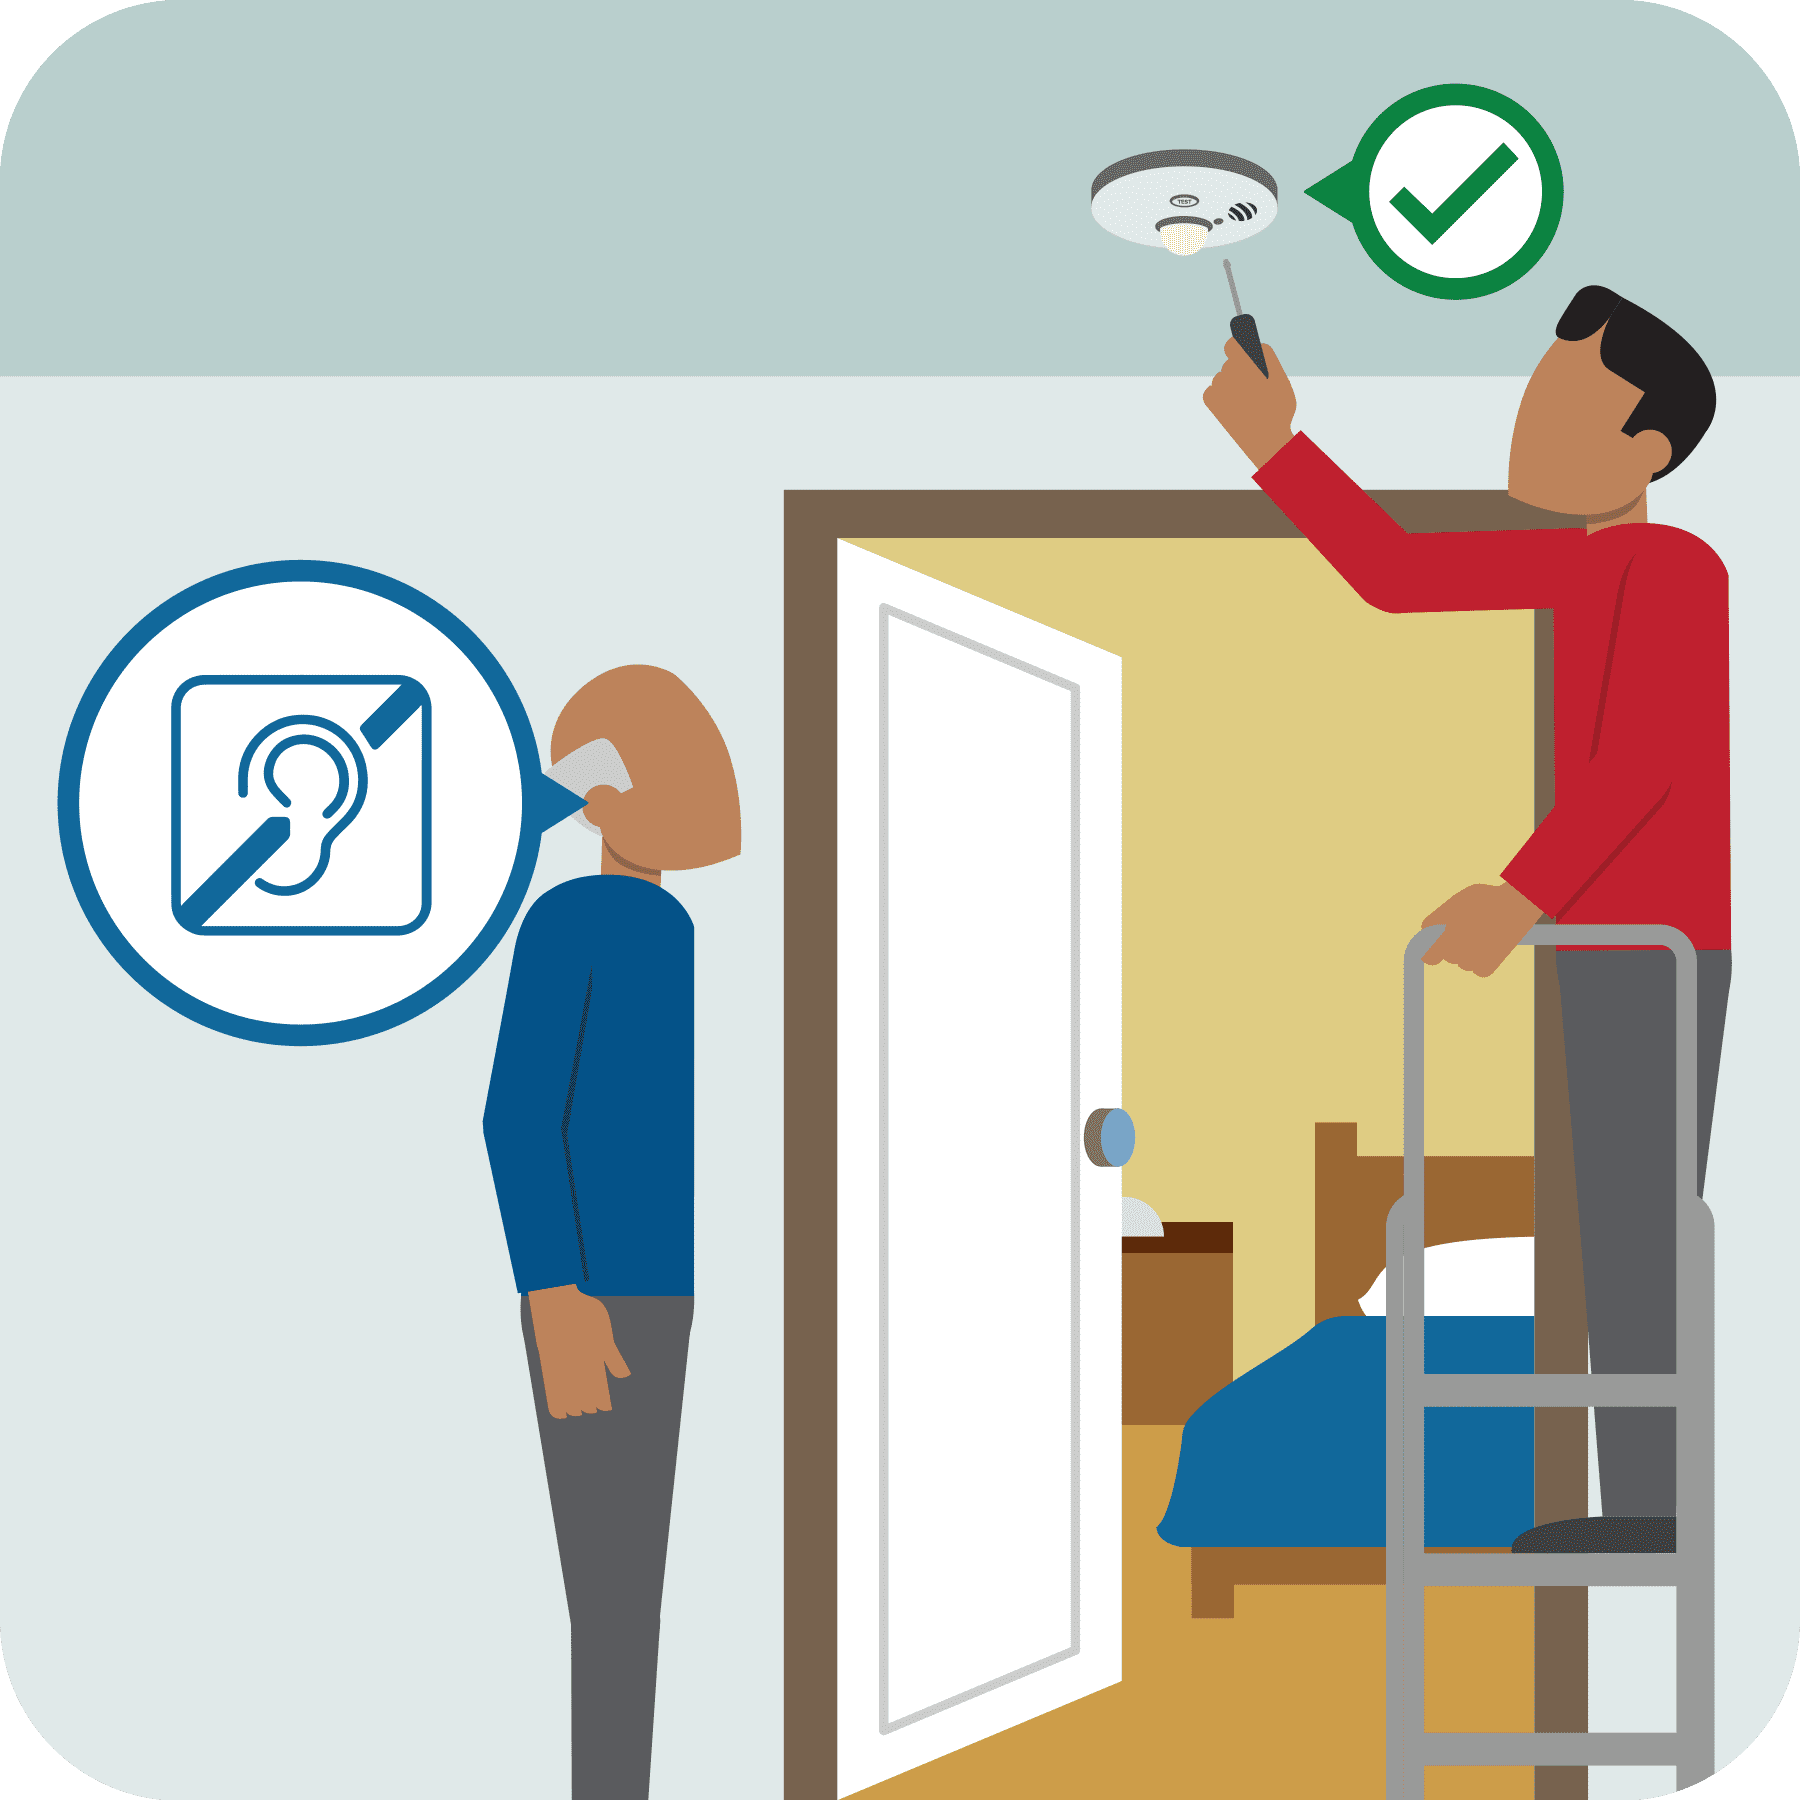 remember to test your smoke alarms